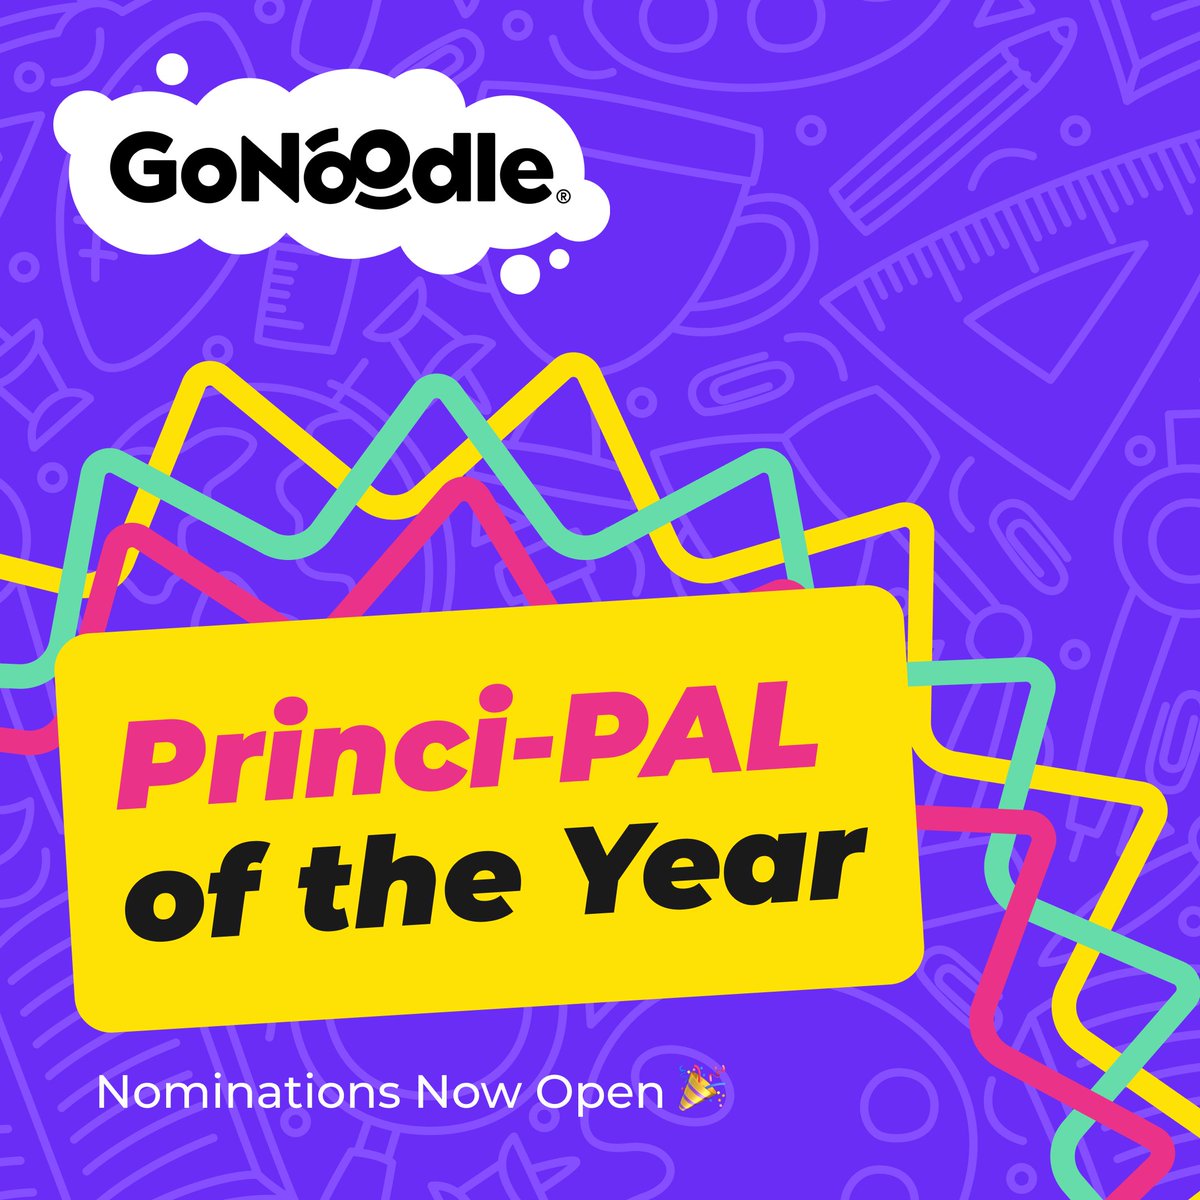 Nominate your school's leader for GoNoodle's 'Princi-PAL of the Year' award! 🌟 Share why your principal or assistant principal deserves recognition and a chance to win fantastic prizes! 🏆 Click the link below! #PrincipalAppreciation 🍎✨ 482olcvl.sibpages.com